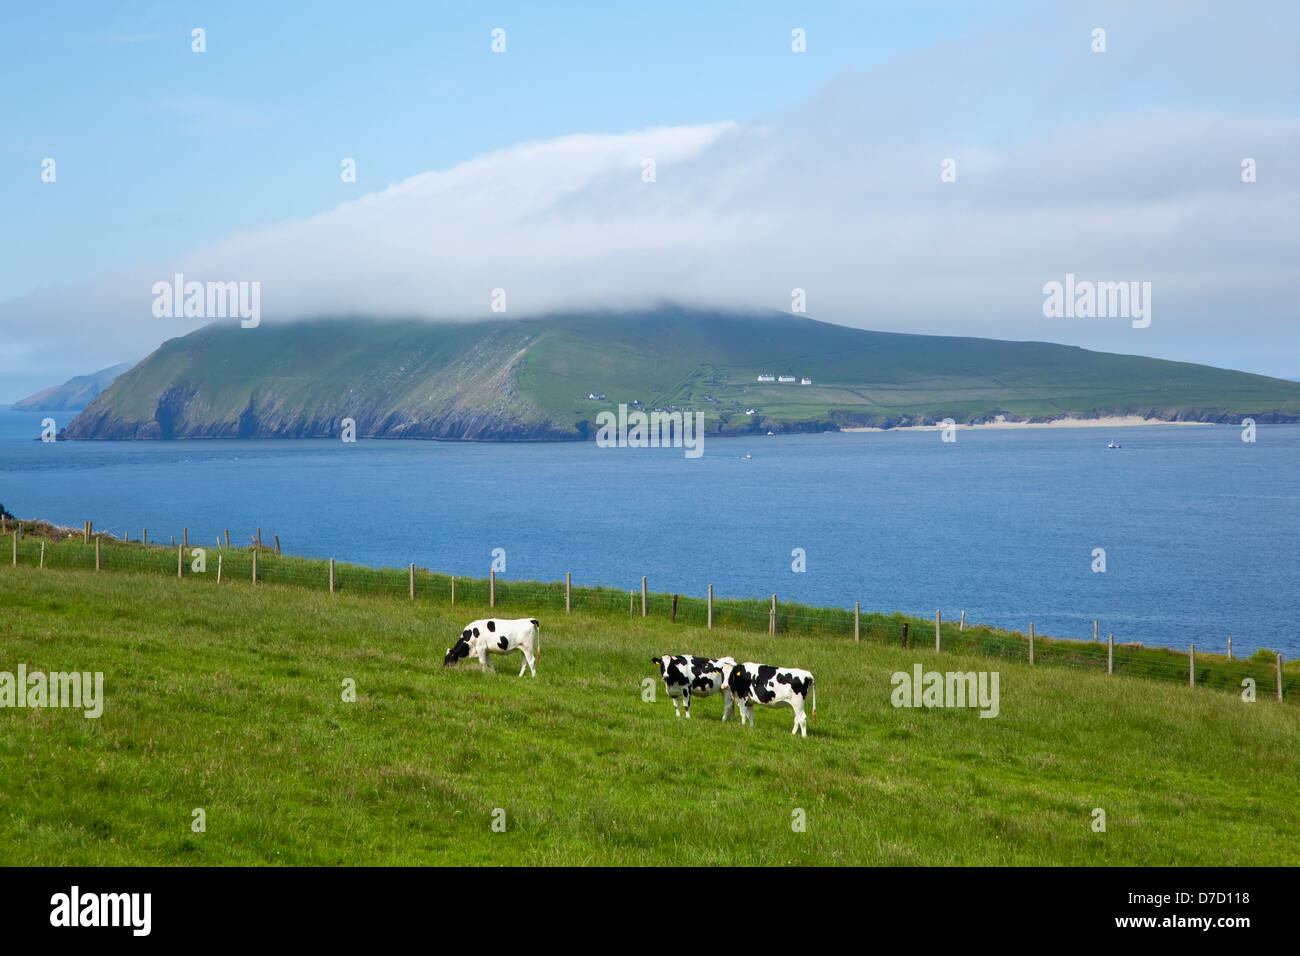 Cows grazing in a field along the coast on blasket sound in the blasket islands;County kerry ireland Stock Photo